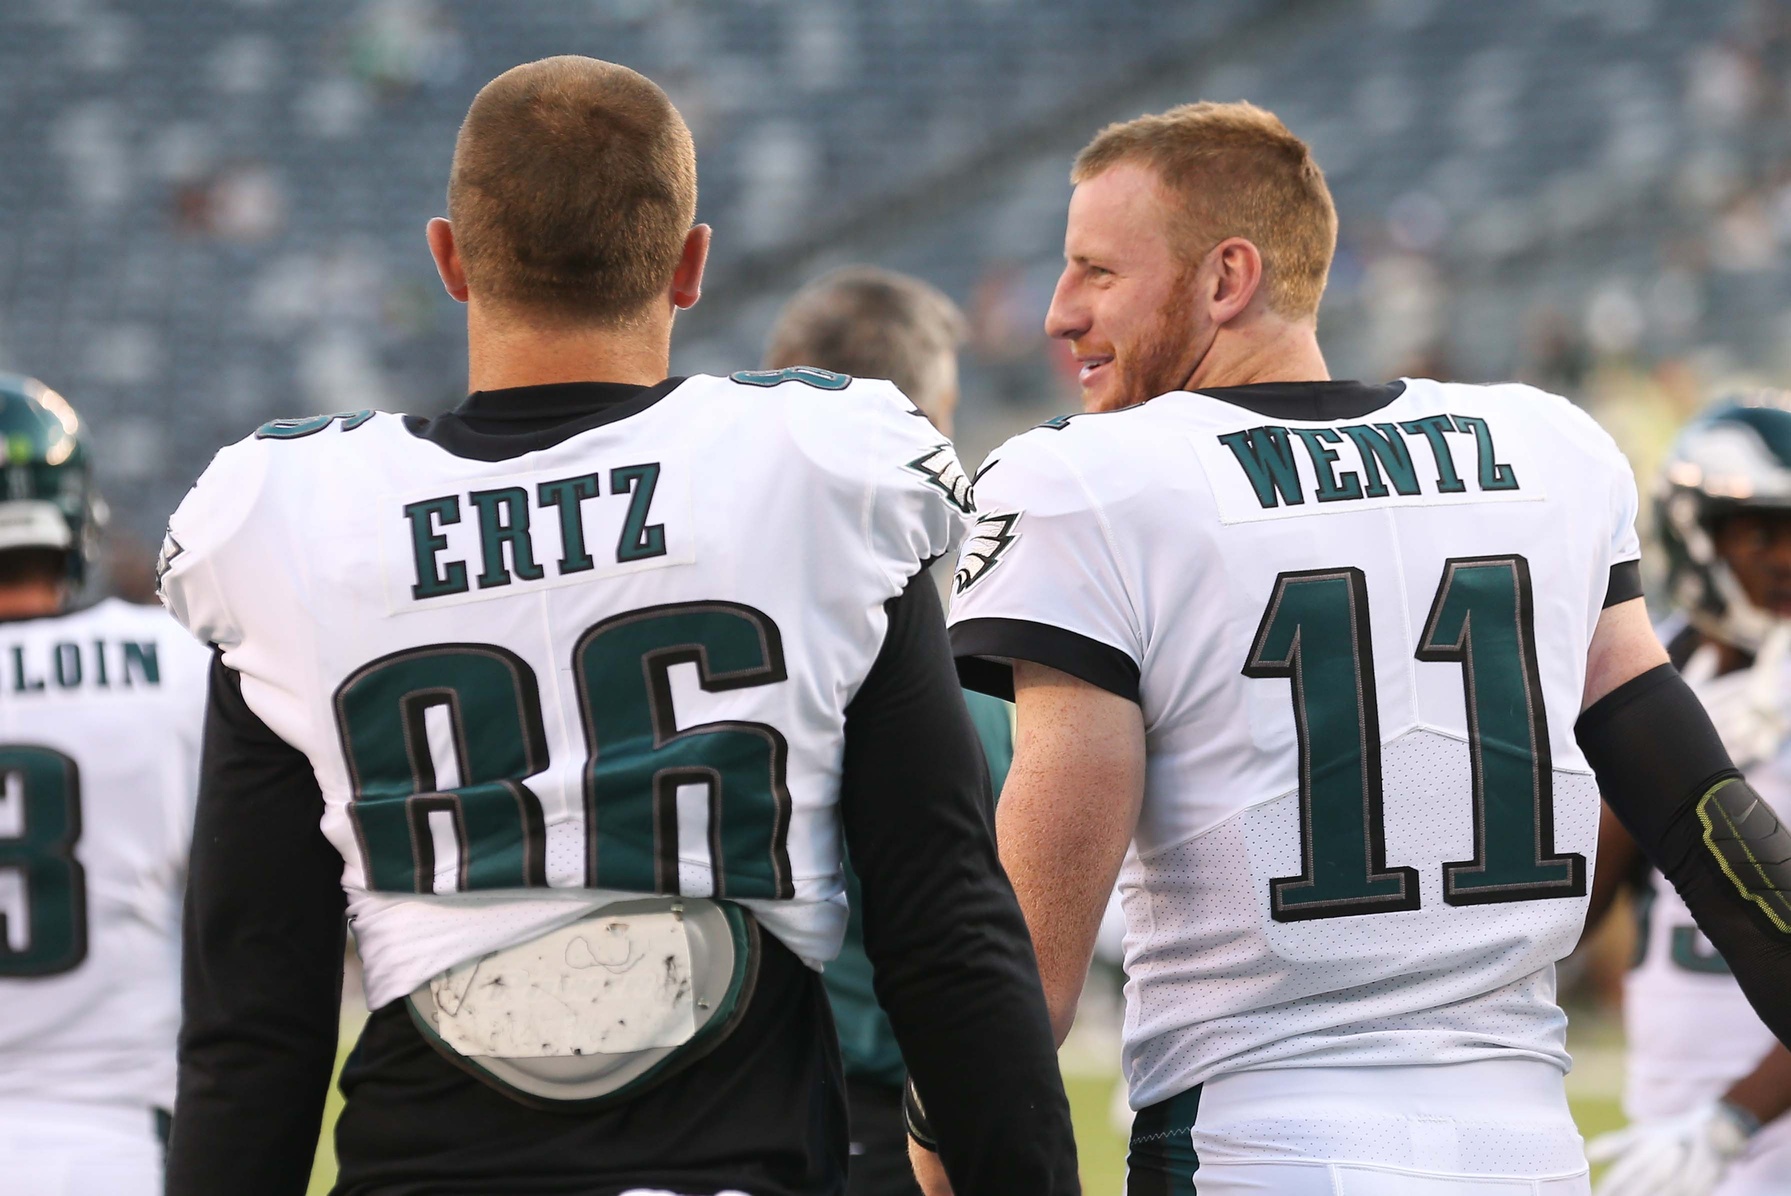 This Is The Year Zach Ertz Actually Breaks Out, and Other Fantasy Values for Week 1